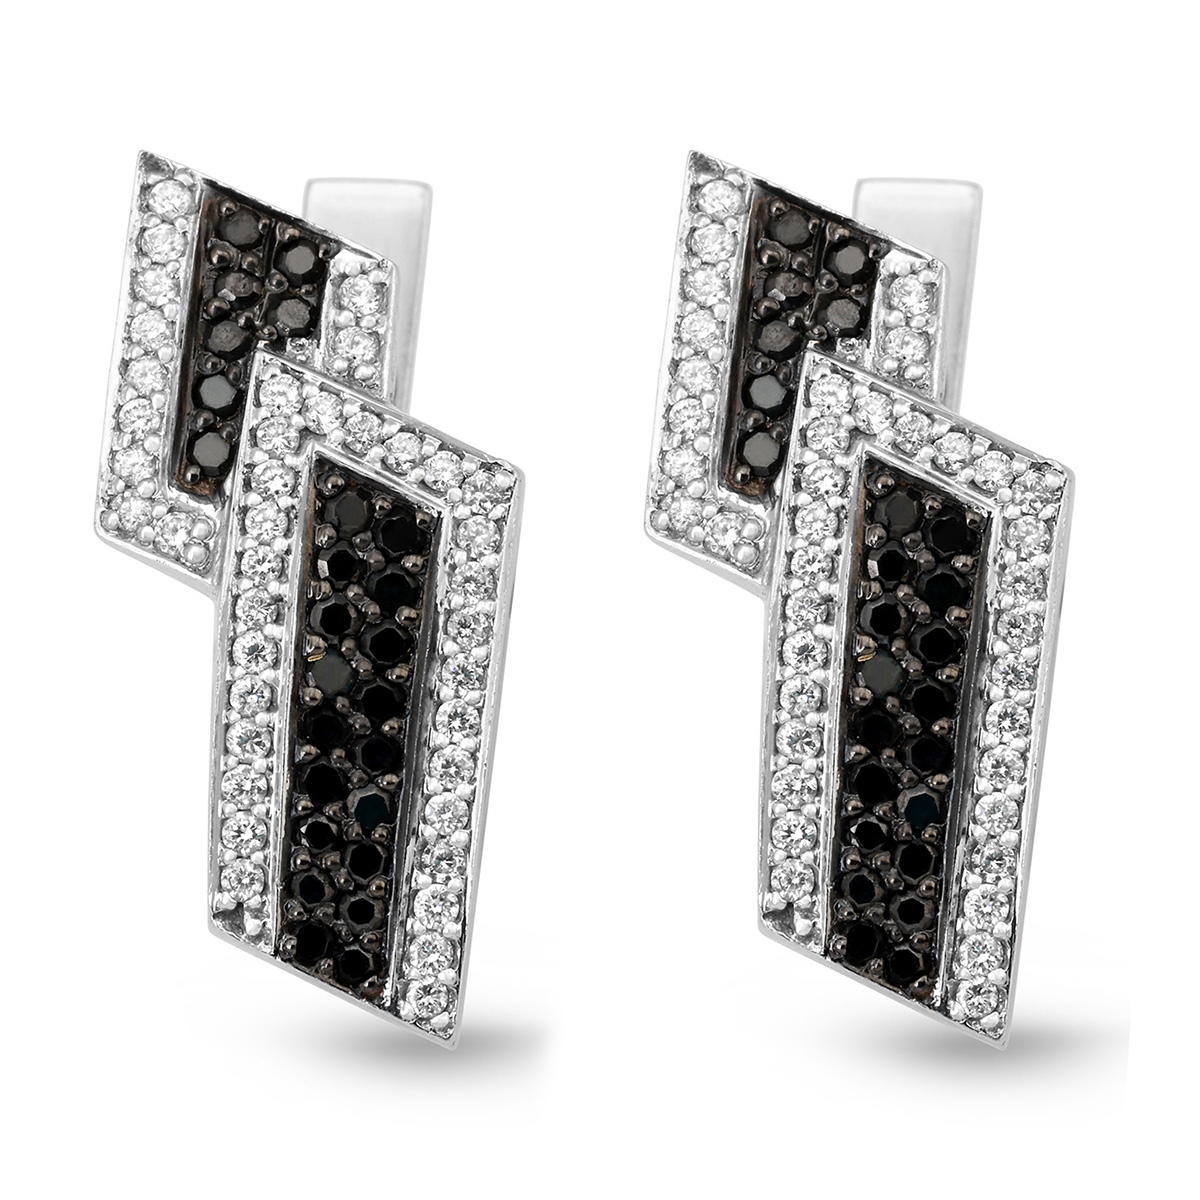 Anbinder Jewelry 14K White Gold Color Block Earrings with Diamonds - 1